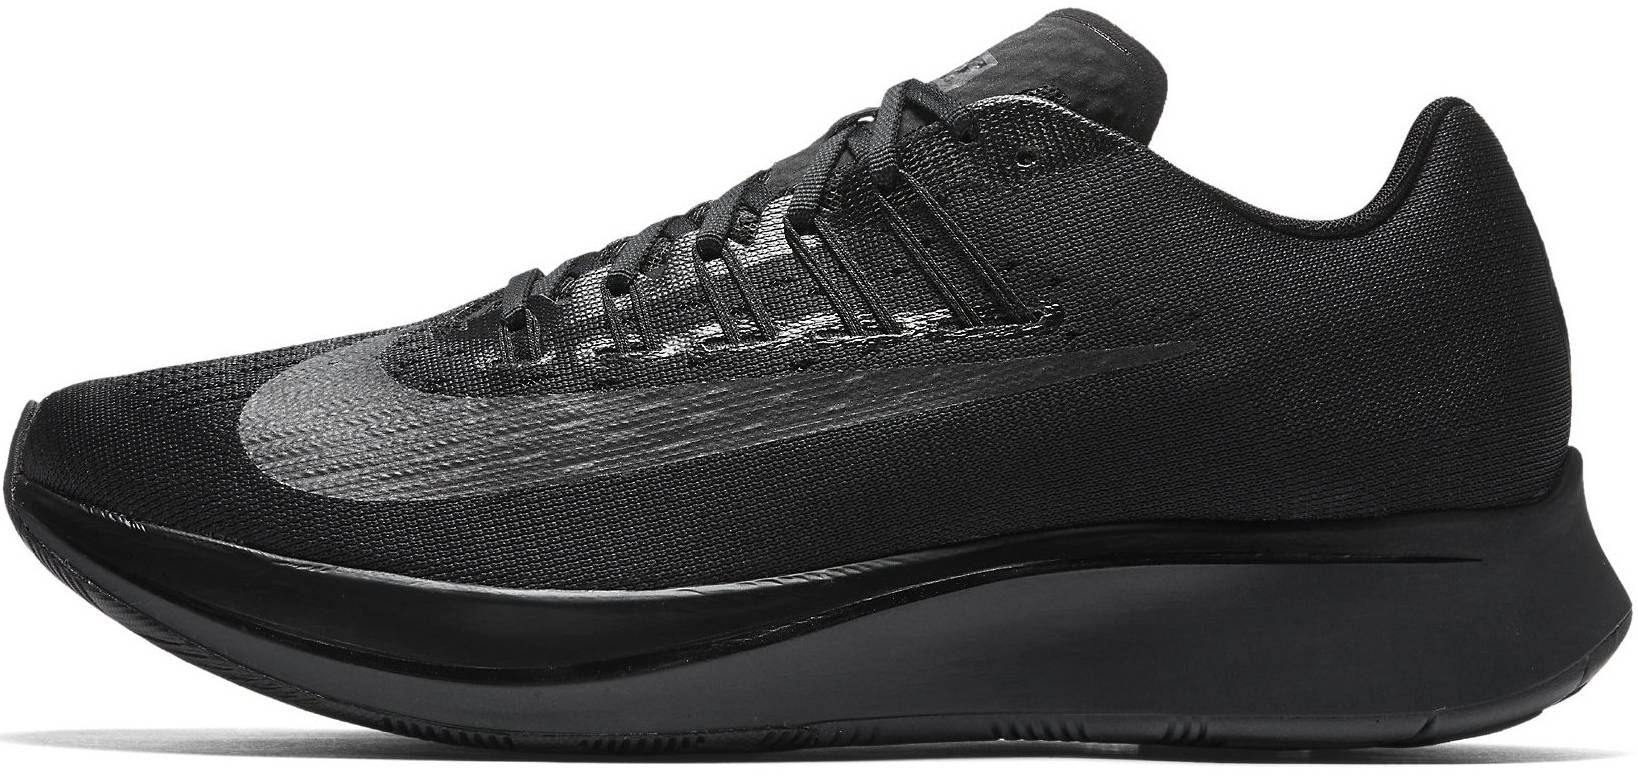 Nike Zoom Fly - Review 2021 - Facts, Deals (£110) | RunRepeat